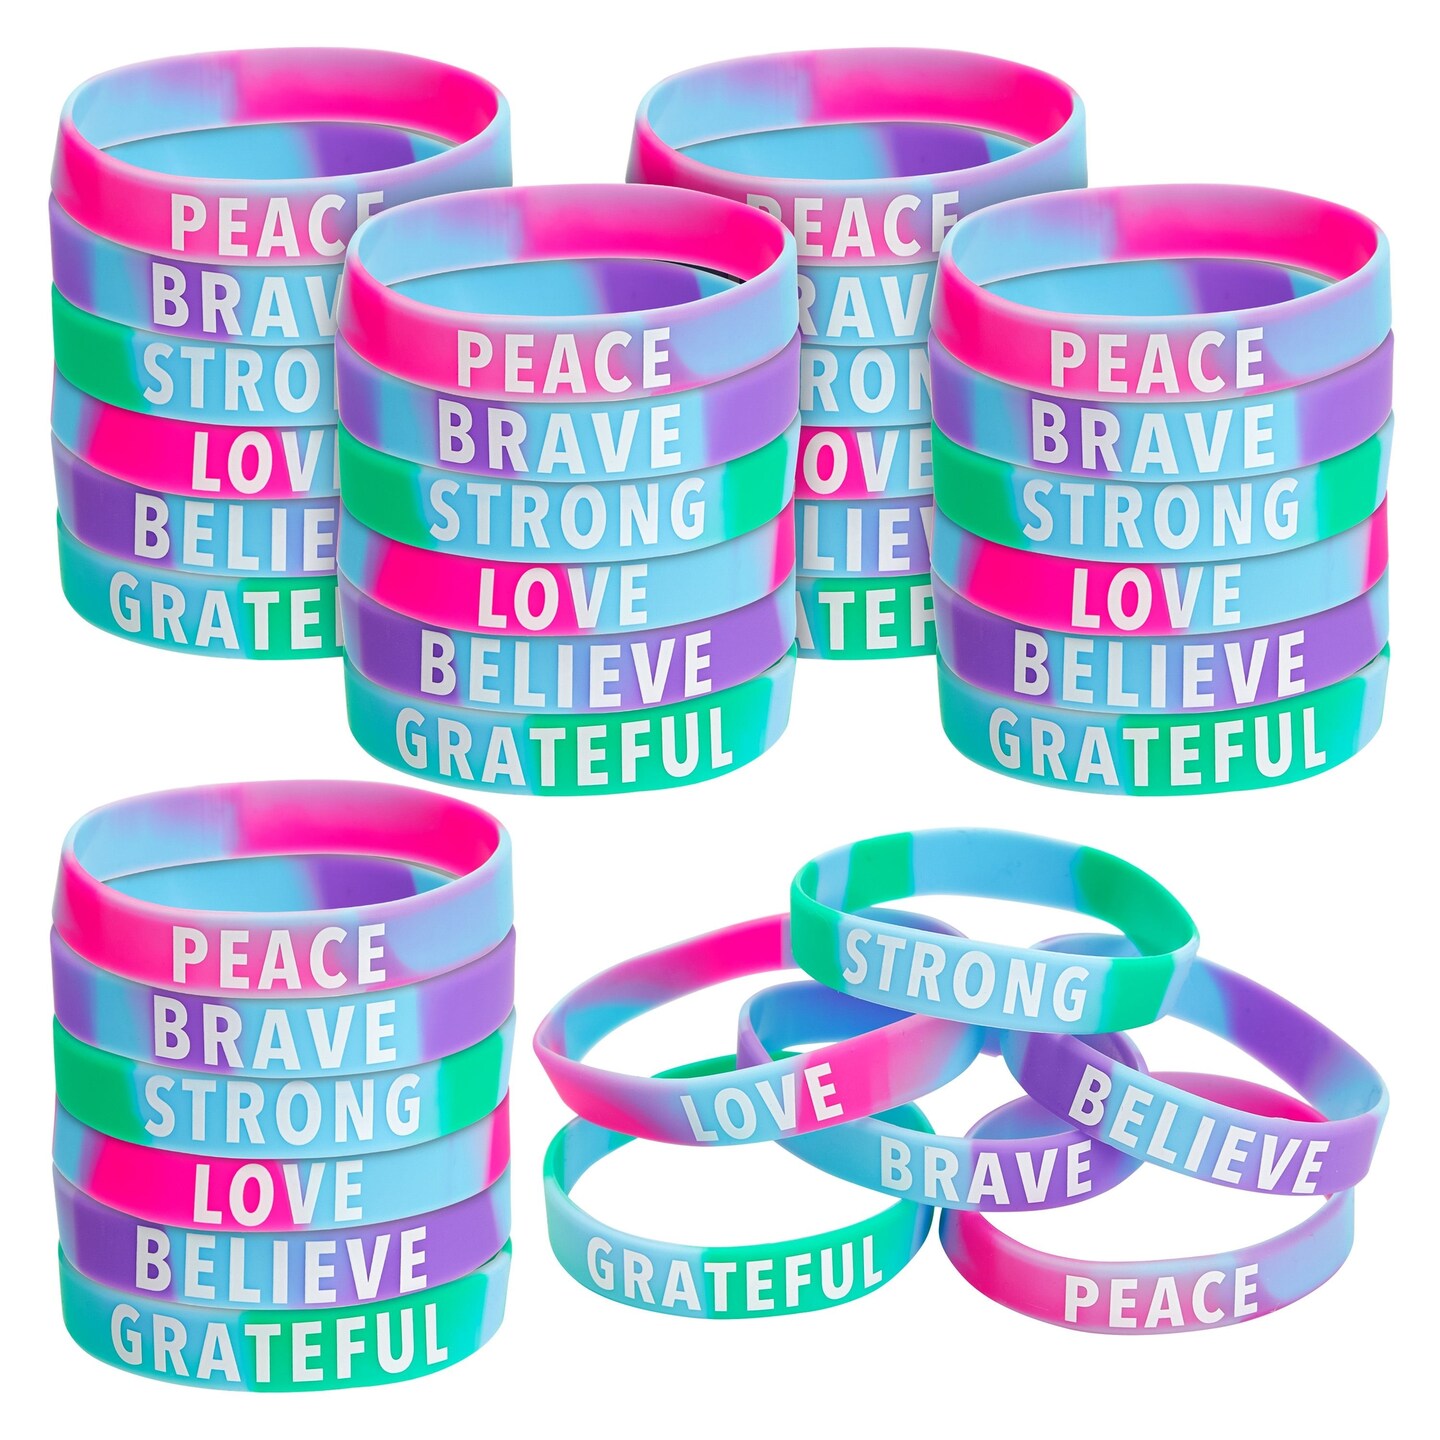 36 Pack Inspirational Rubber Bracelets, Motivational Silicone Wristbands, Tie Dye Party Favors for Kids and Adults